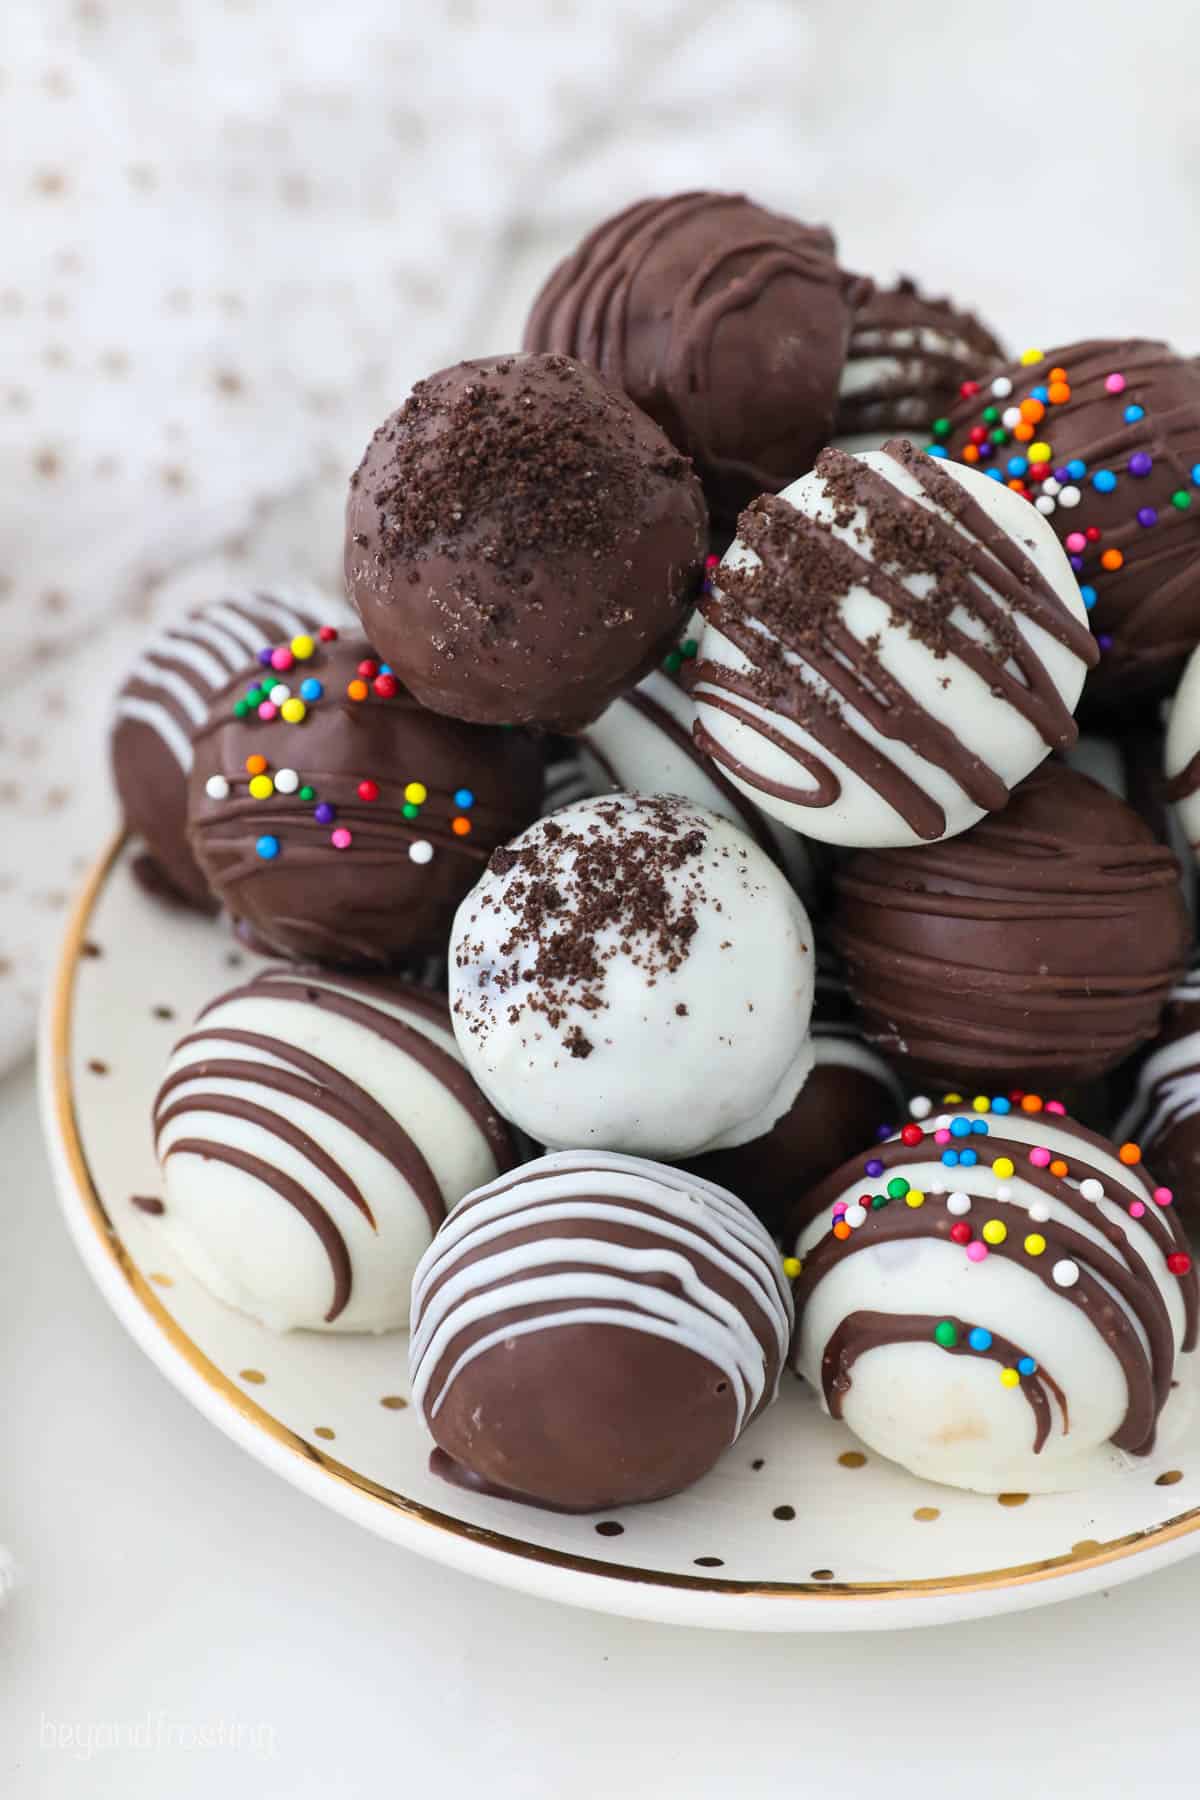 A pile of finished Oreo Truffles on a plate.